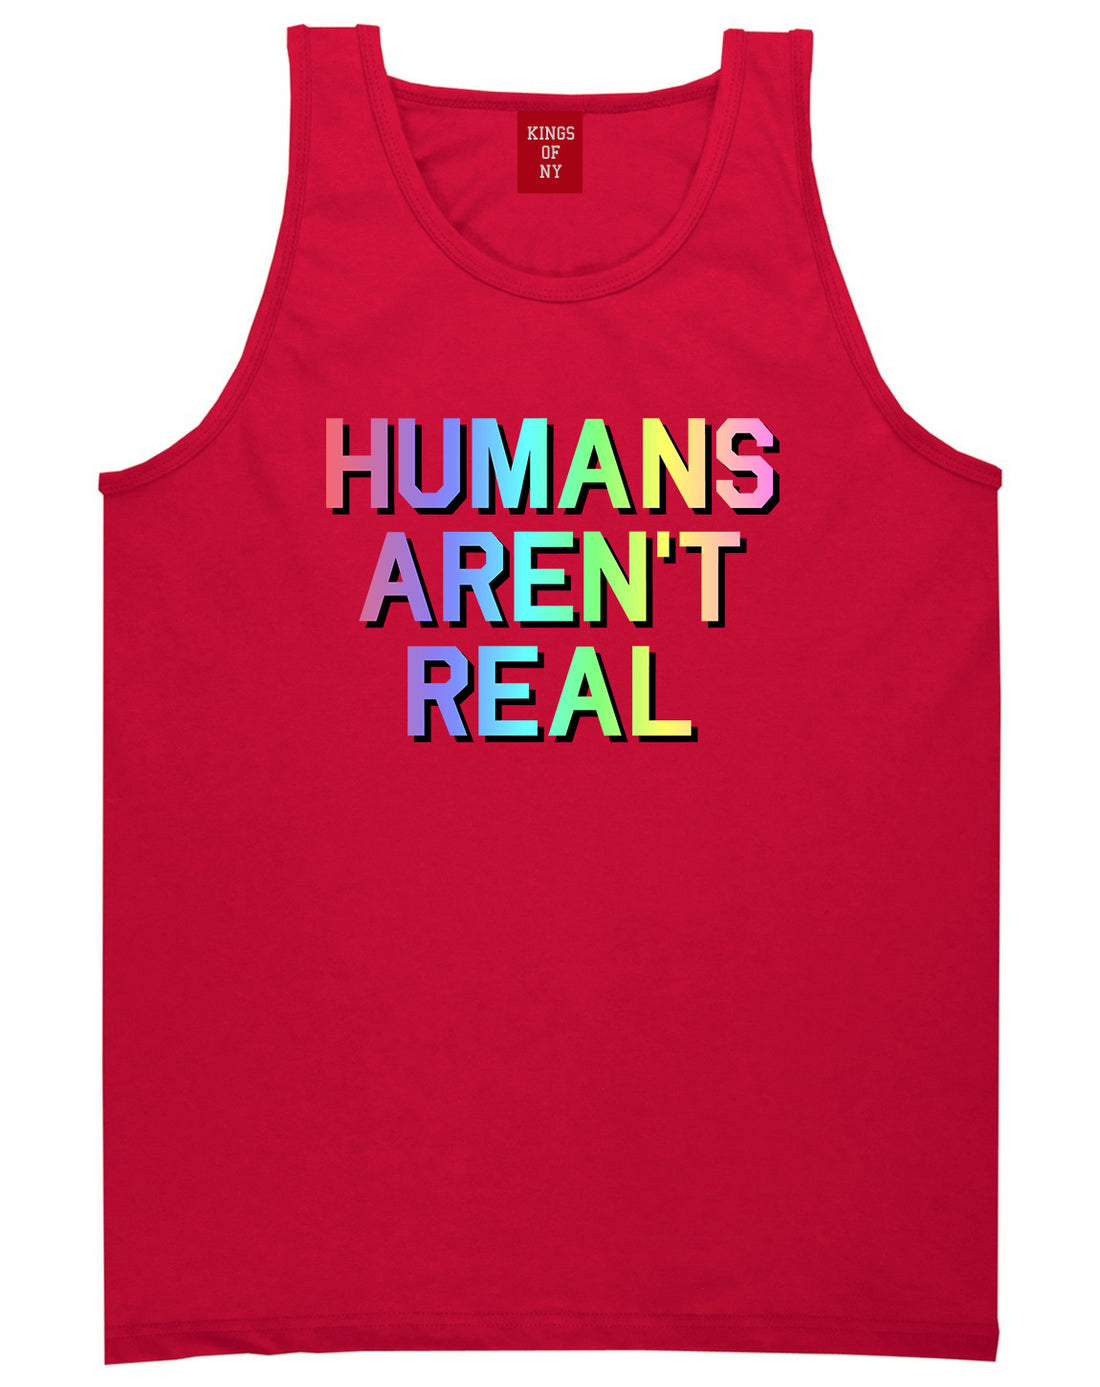 Humans Arent Real Tie Dye Hippie Rave Mens Tank Top T-Shirt Red